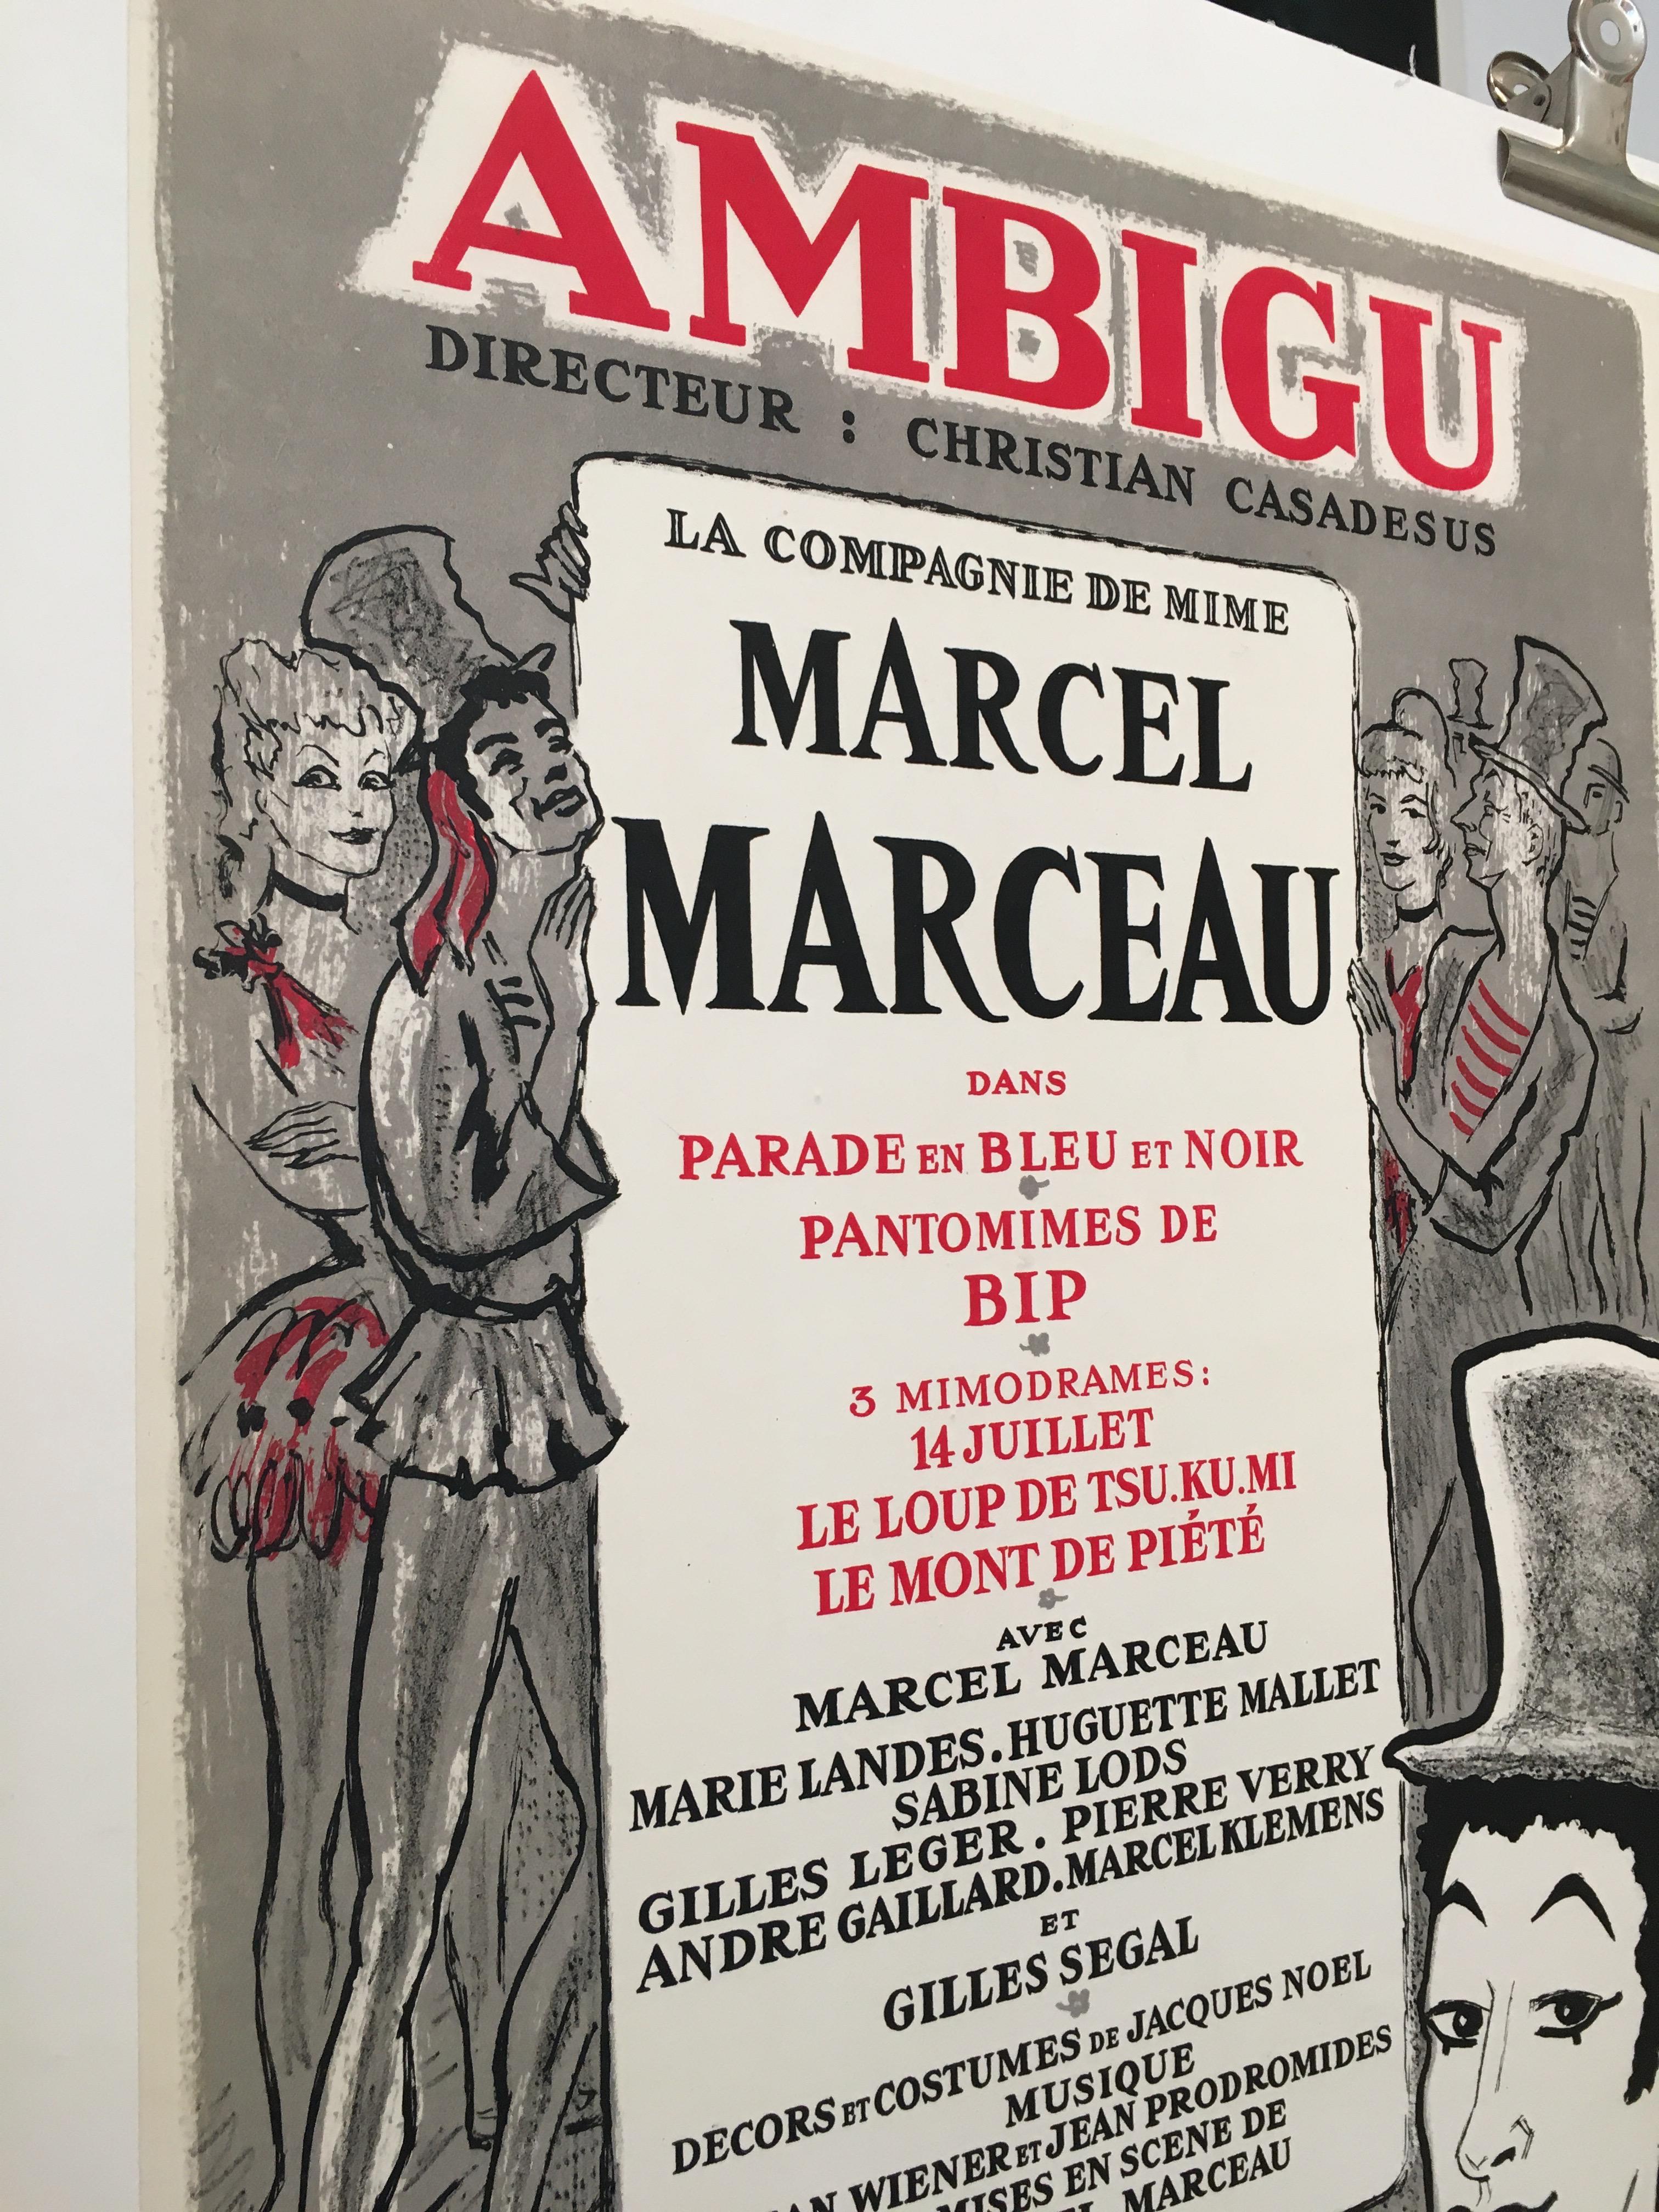 'Marcel Marceau' French Cabaret and Theatre Original Lithograph Poster, 1995 In Good Condition For Sale In Melbourne, Victoria